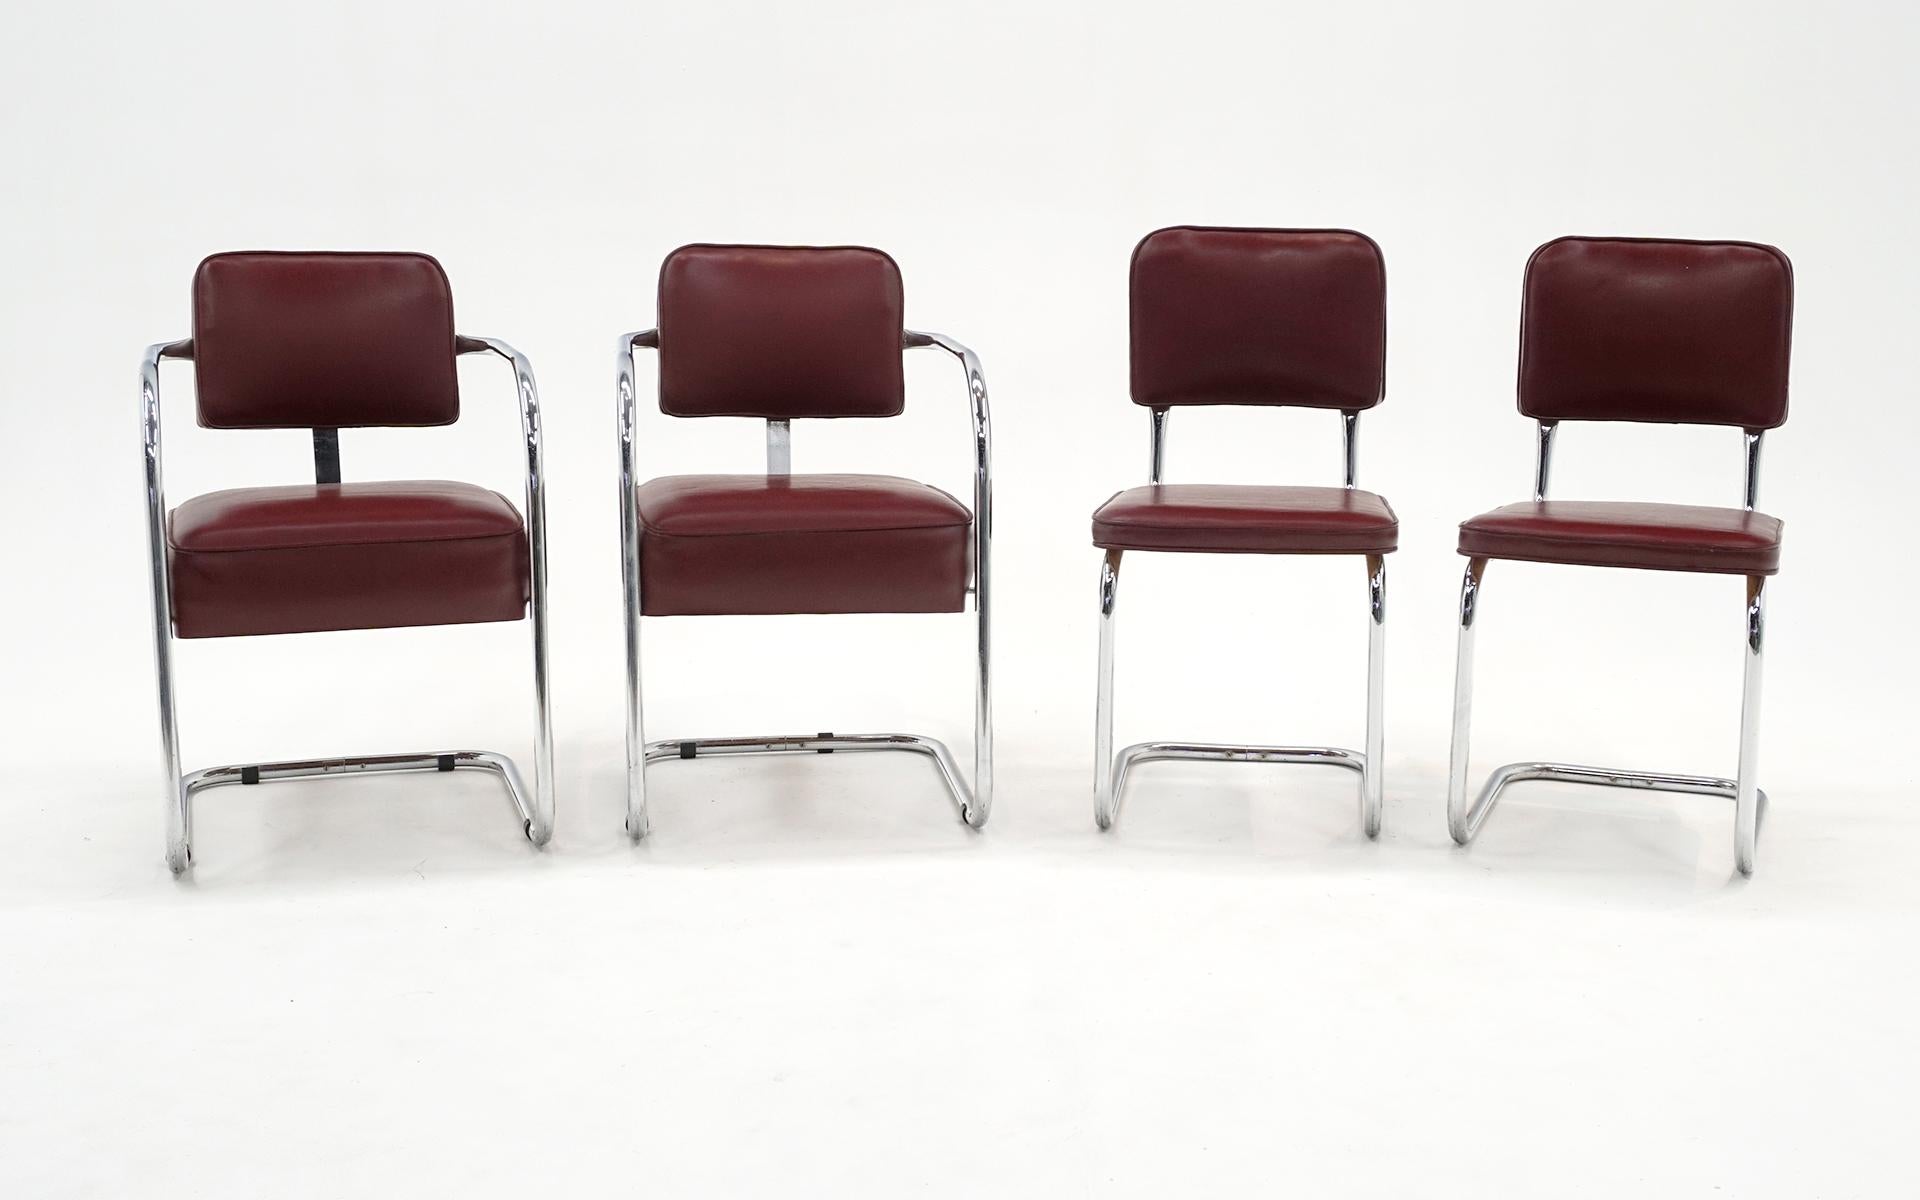 Set of 4 tubular chrome chairs, two with arms, two side chairs. We are not sure of the designer and manufacturer but these are similar to KEM Weber, Troy Sunshade. Lloyd, and Gilbert Rohde. Bauhaus / mid century. The arm chairs can function as small